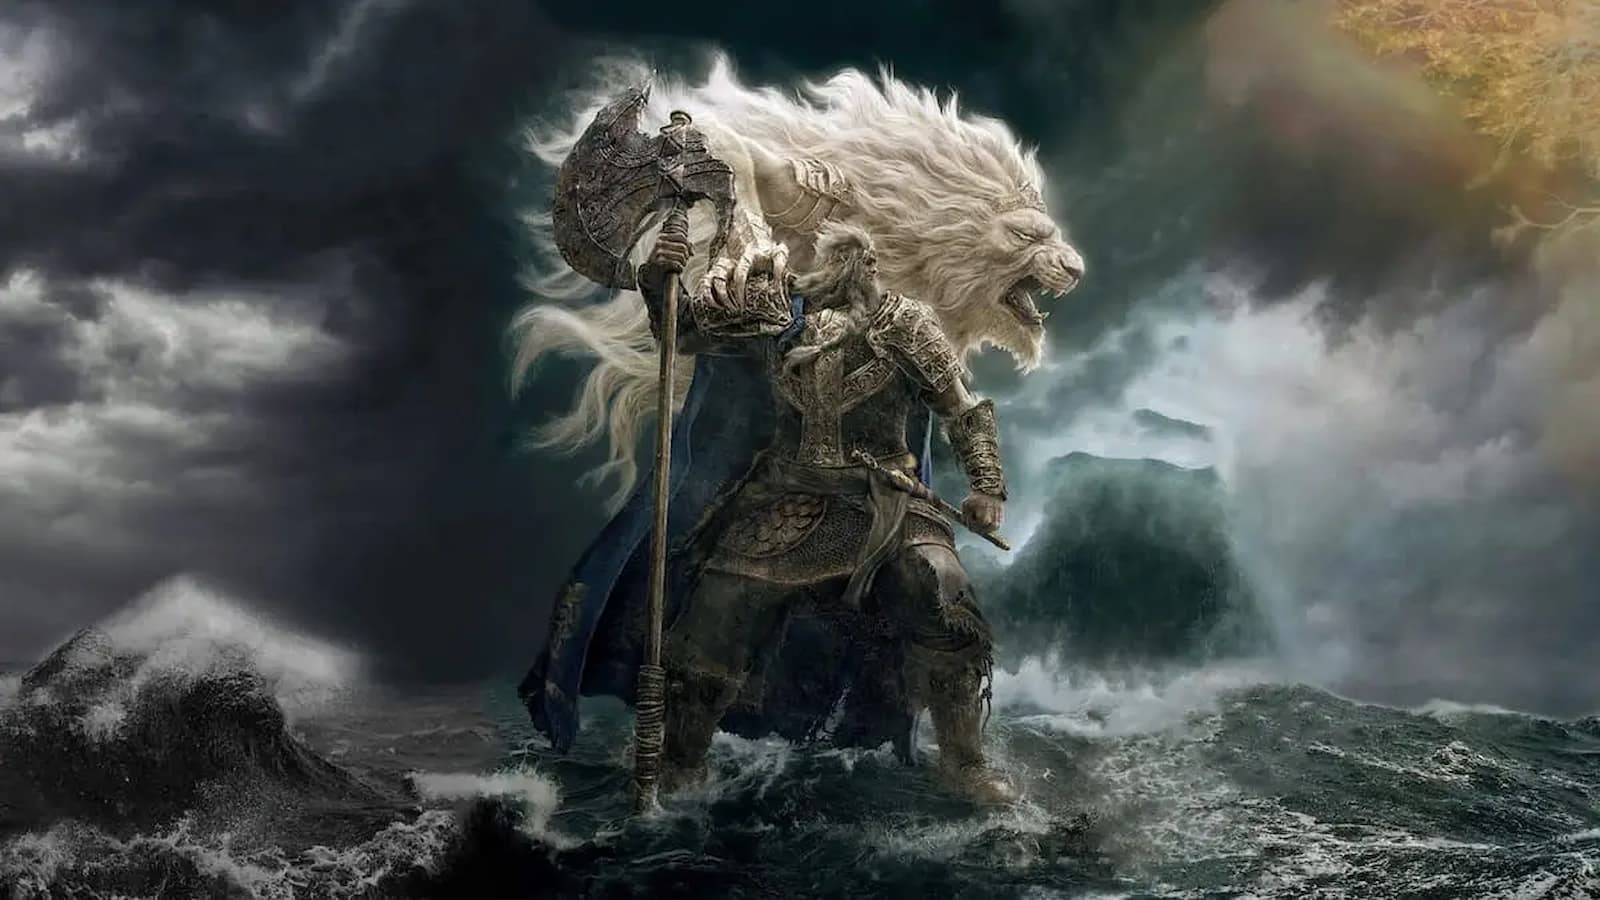 Official artwork for Godfrey, the First Elden Lord